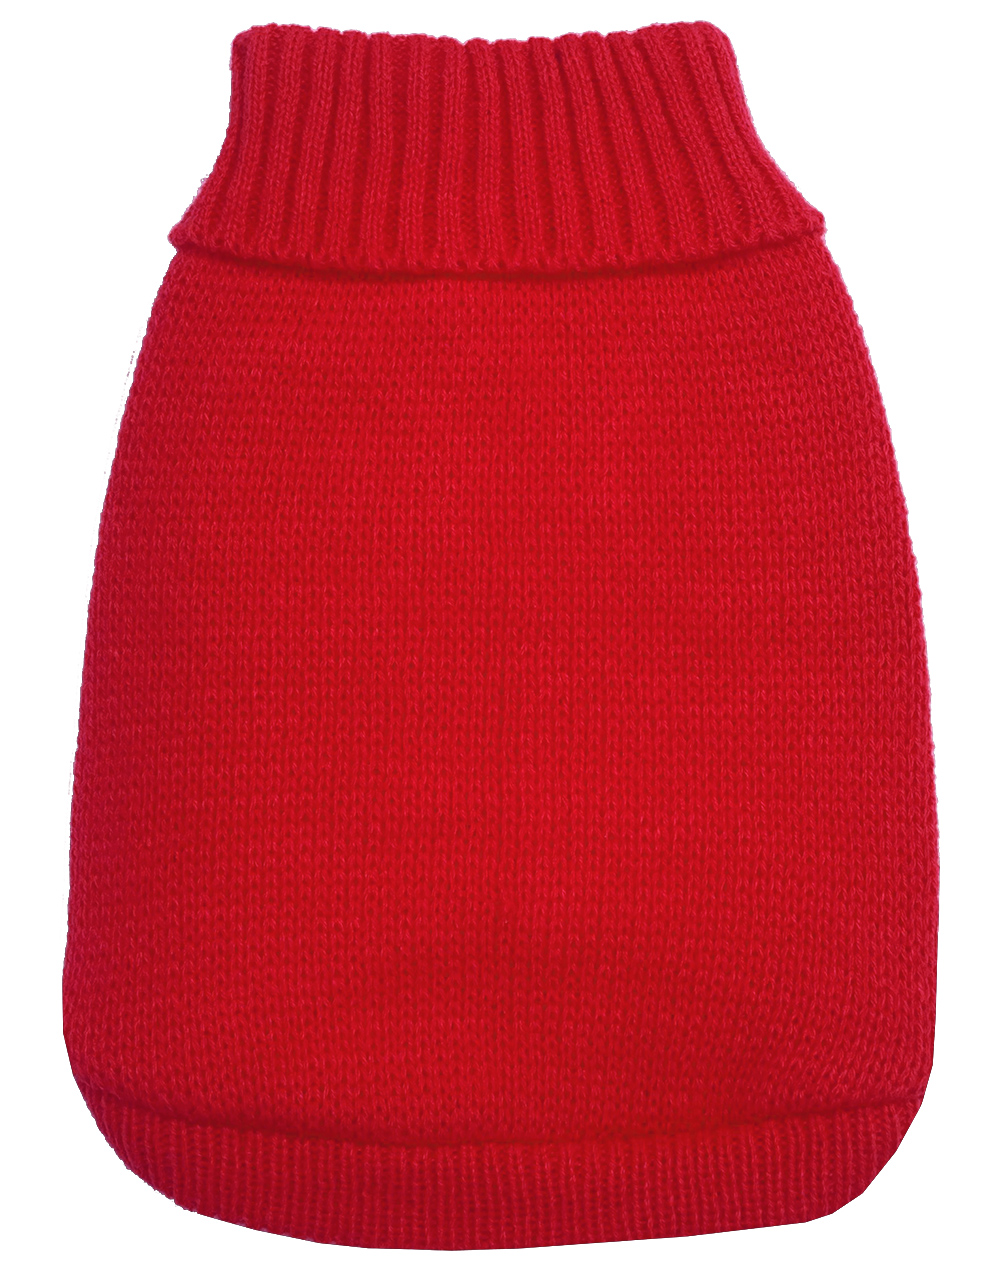 Knit Pet Sweater Red Size XL